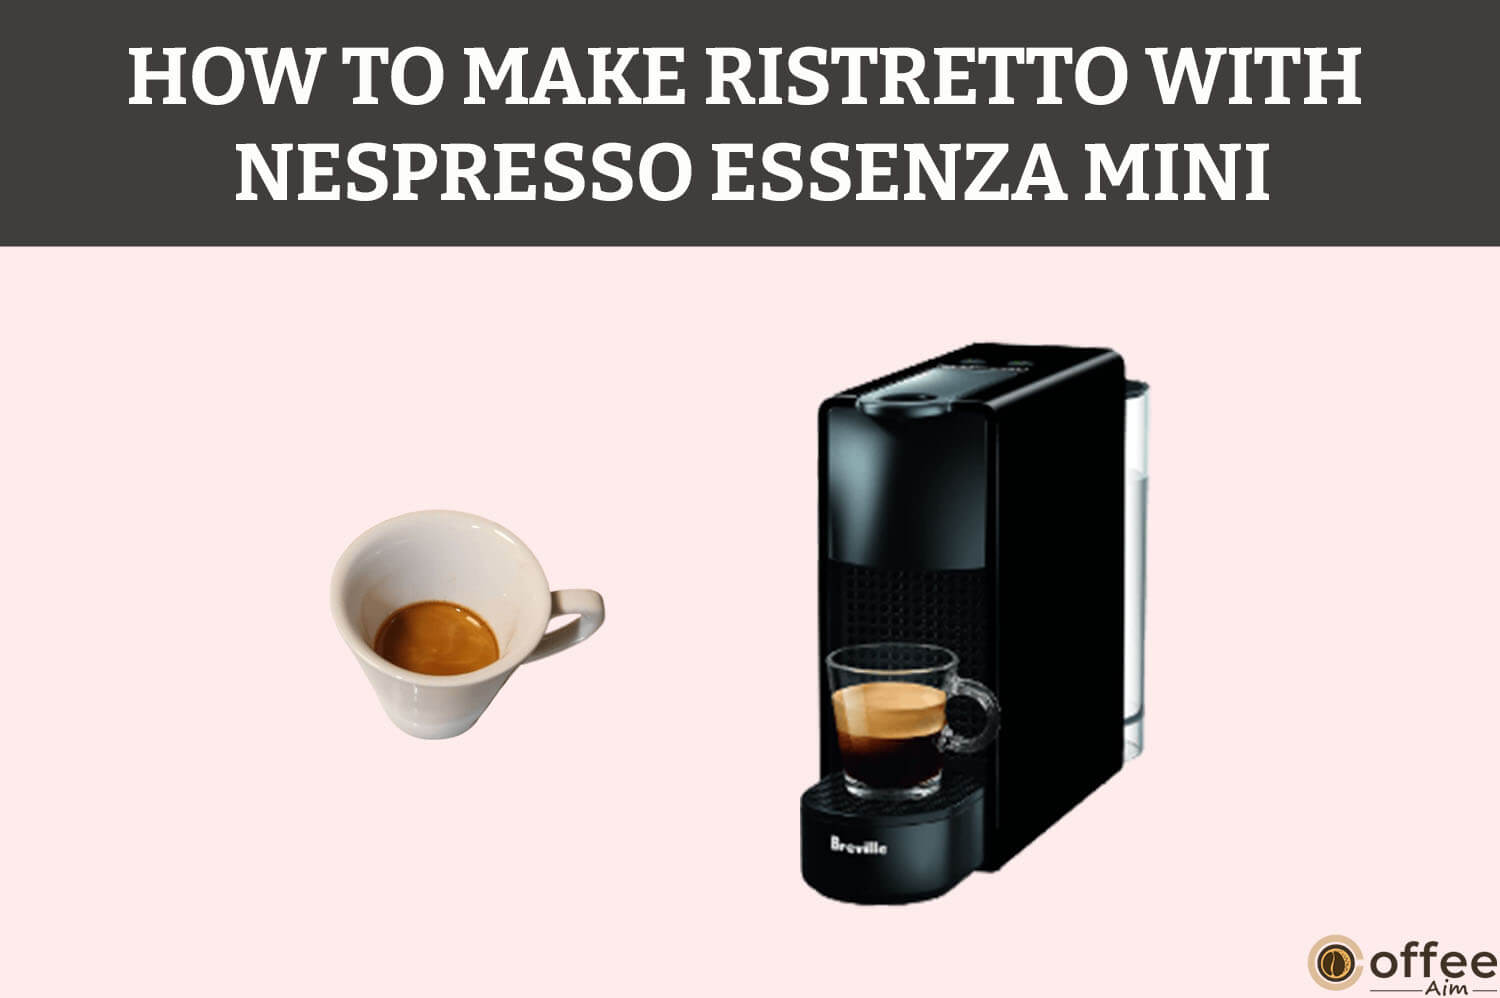 Featured image for the article "How To Make Ristretto With Nespresso Essenza Mini"